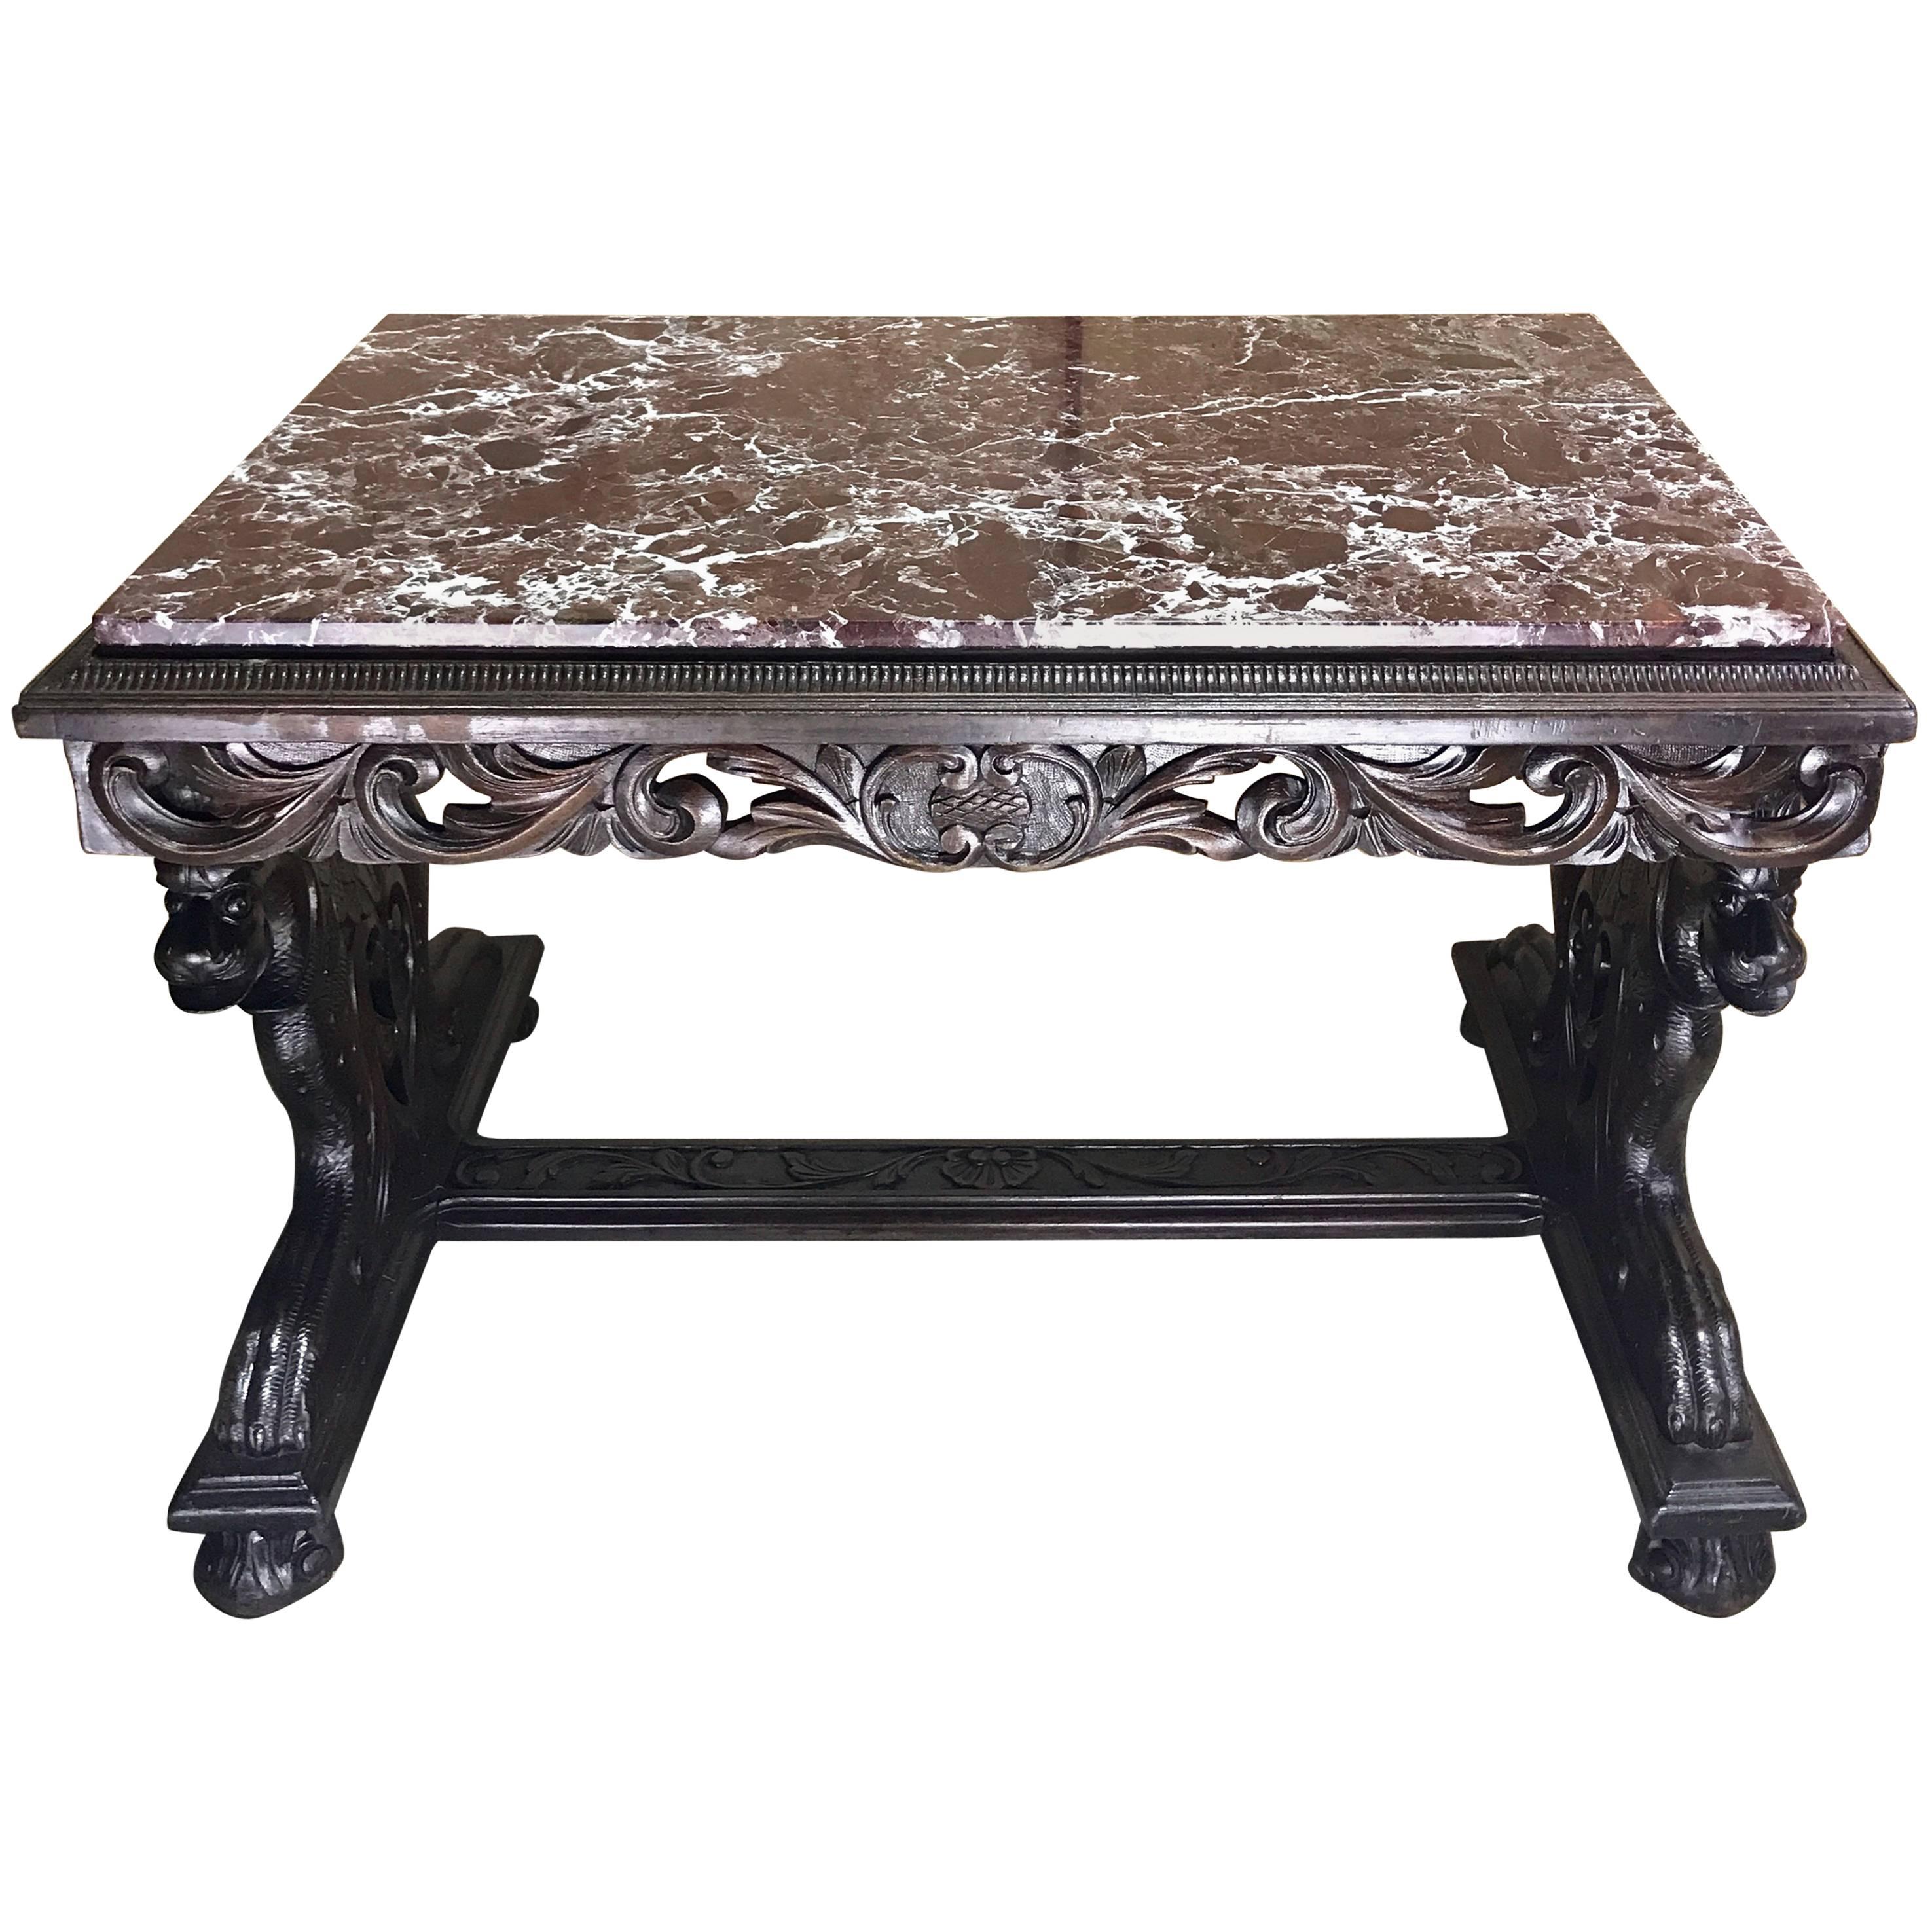 Italian Figural Carved Walnut Marble-Top Table, from the Breakers, Palm Beach FL